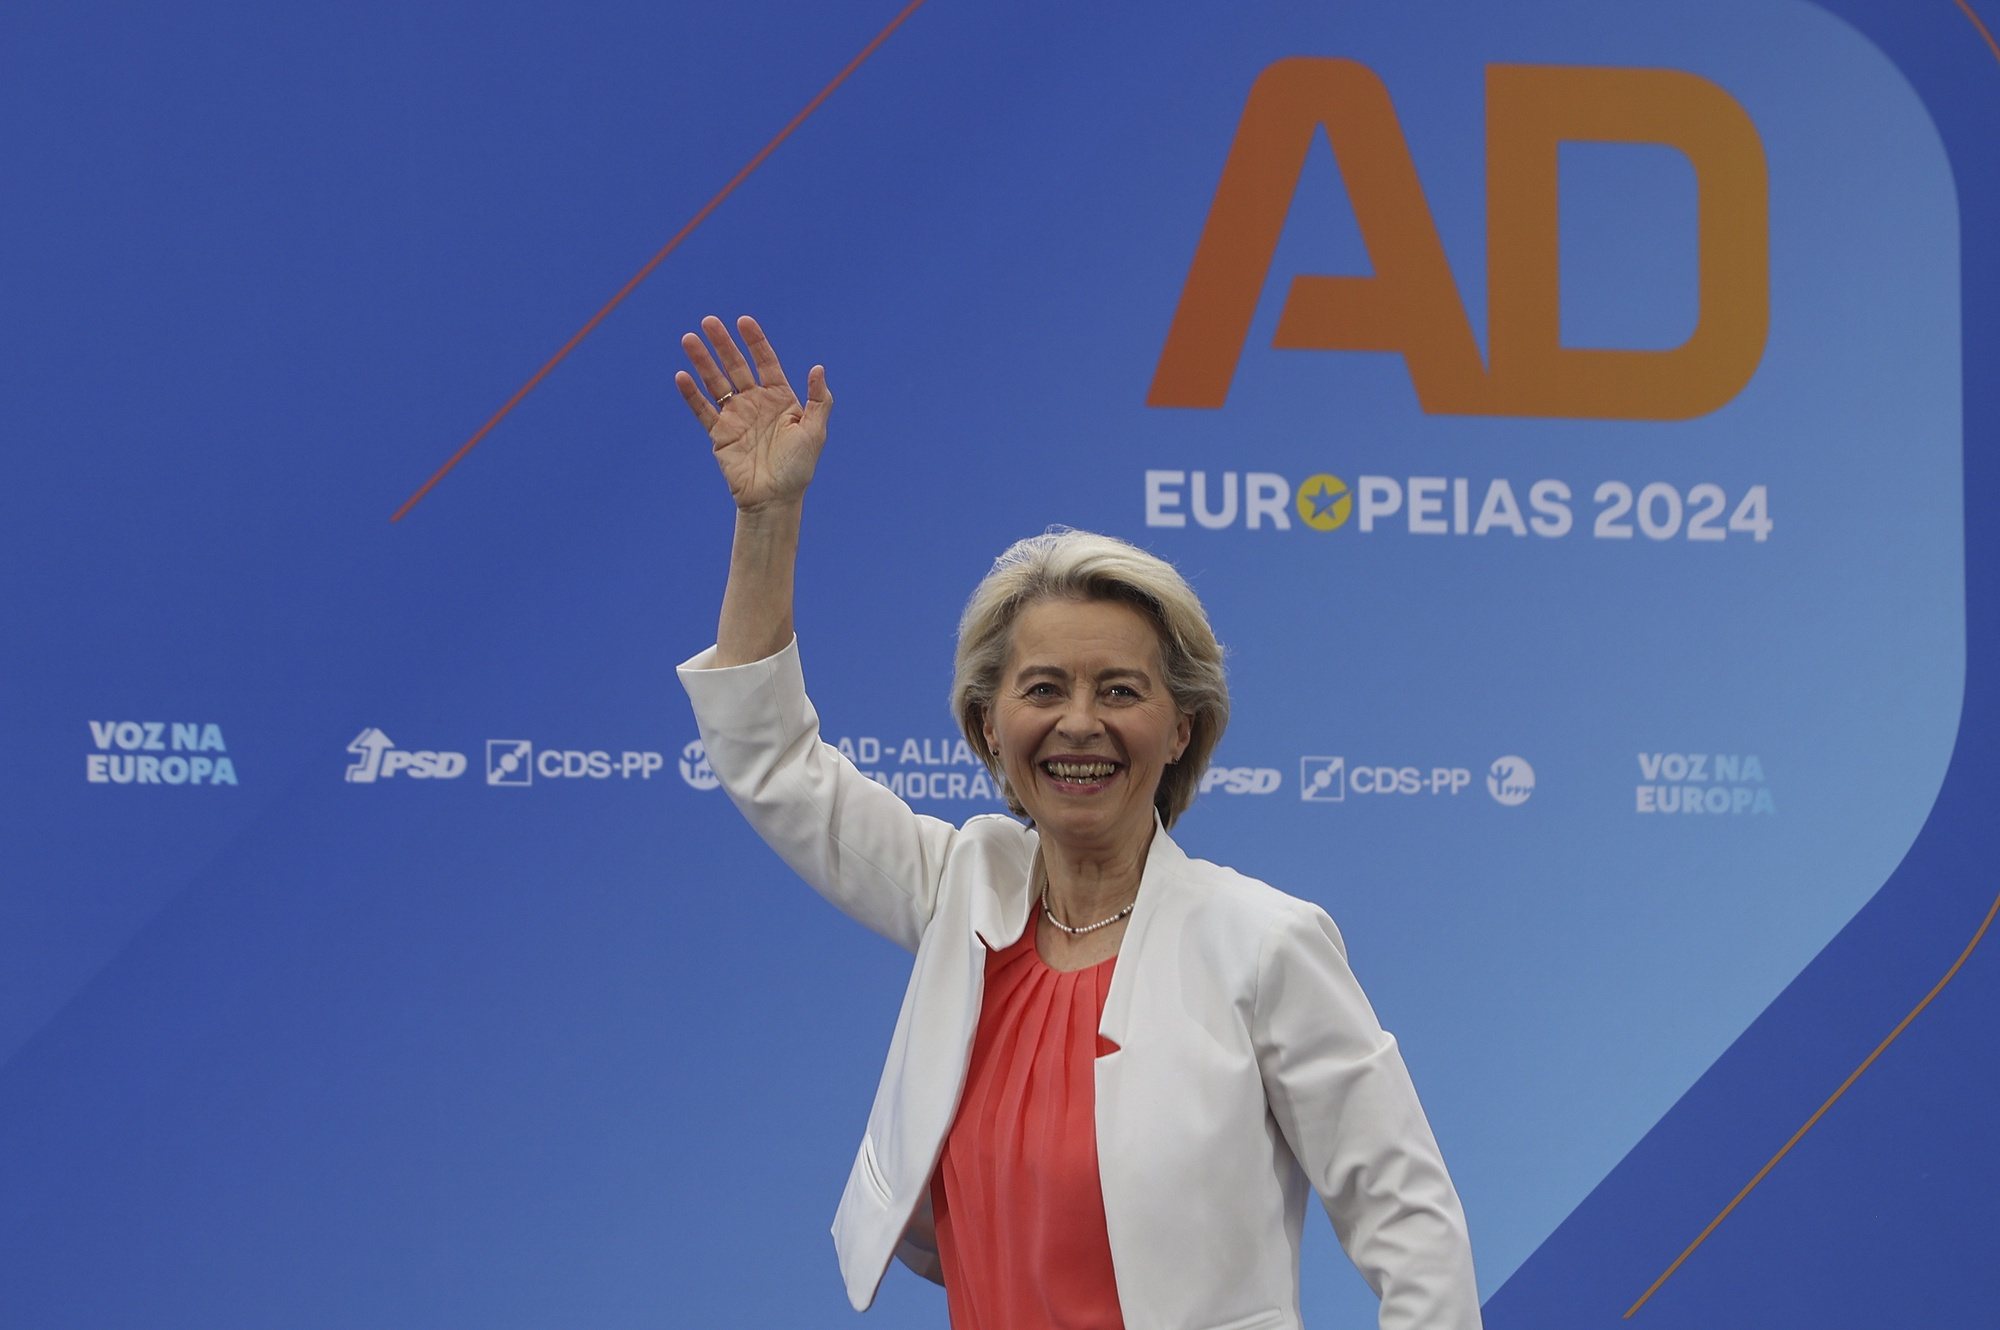 epa11394282 The EPP (European Popular Party) candidate for the presidency of the European Comission, Ursula von der Leyen, delivers a speech during a Democratic Alliance (AD) rally as part of the campaign for the European elections, in Porto, Portugal, 06 June 2024. In Portugal, the European elections take place on 09 June and will be contested by 17 parties and coalitions.  EPA/TIAGO PETINGA